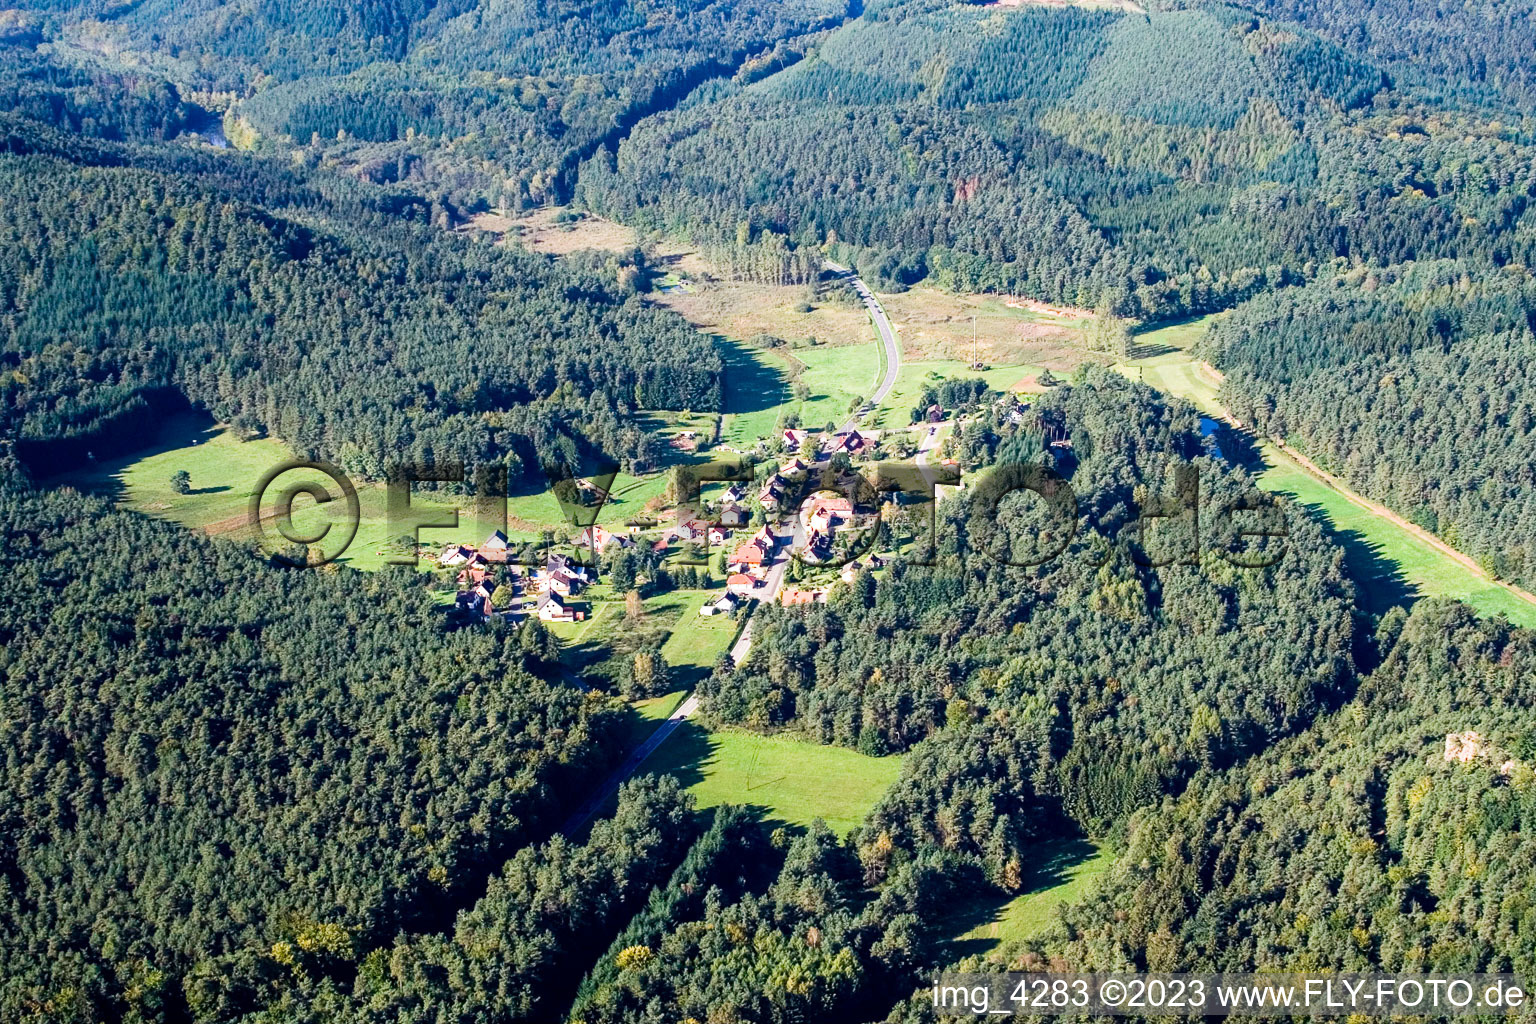 Erlenbach bei Dahn in the state Rhineland-Palatinate, Germany from the drone perspective